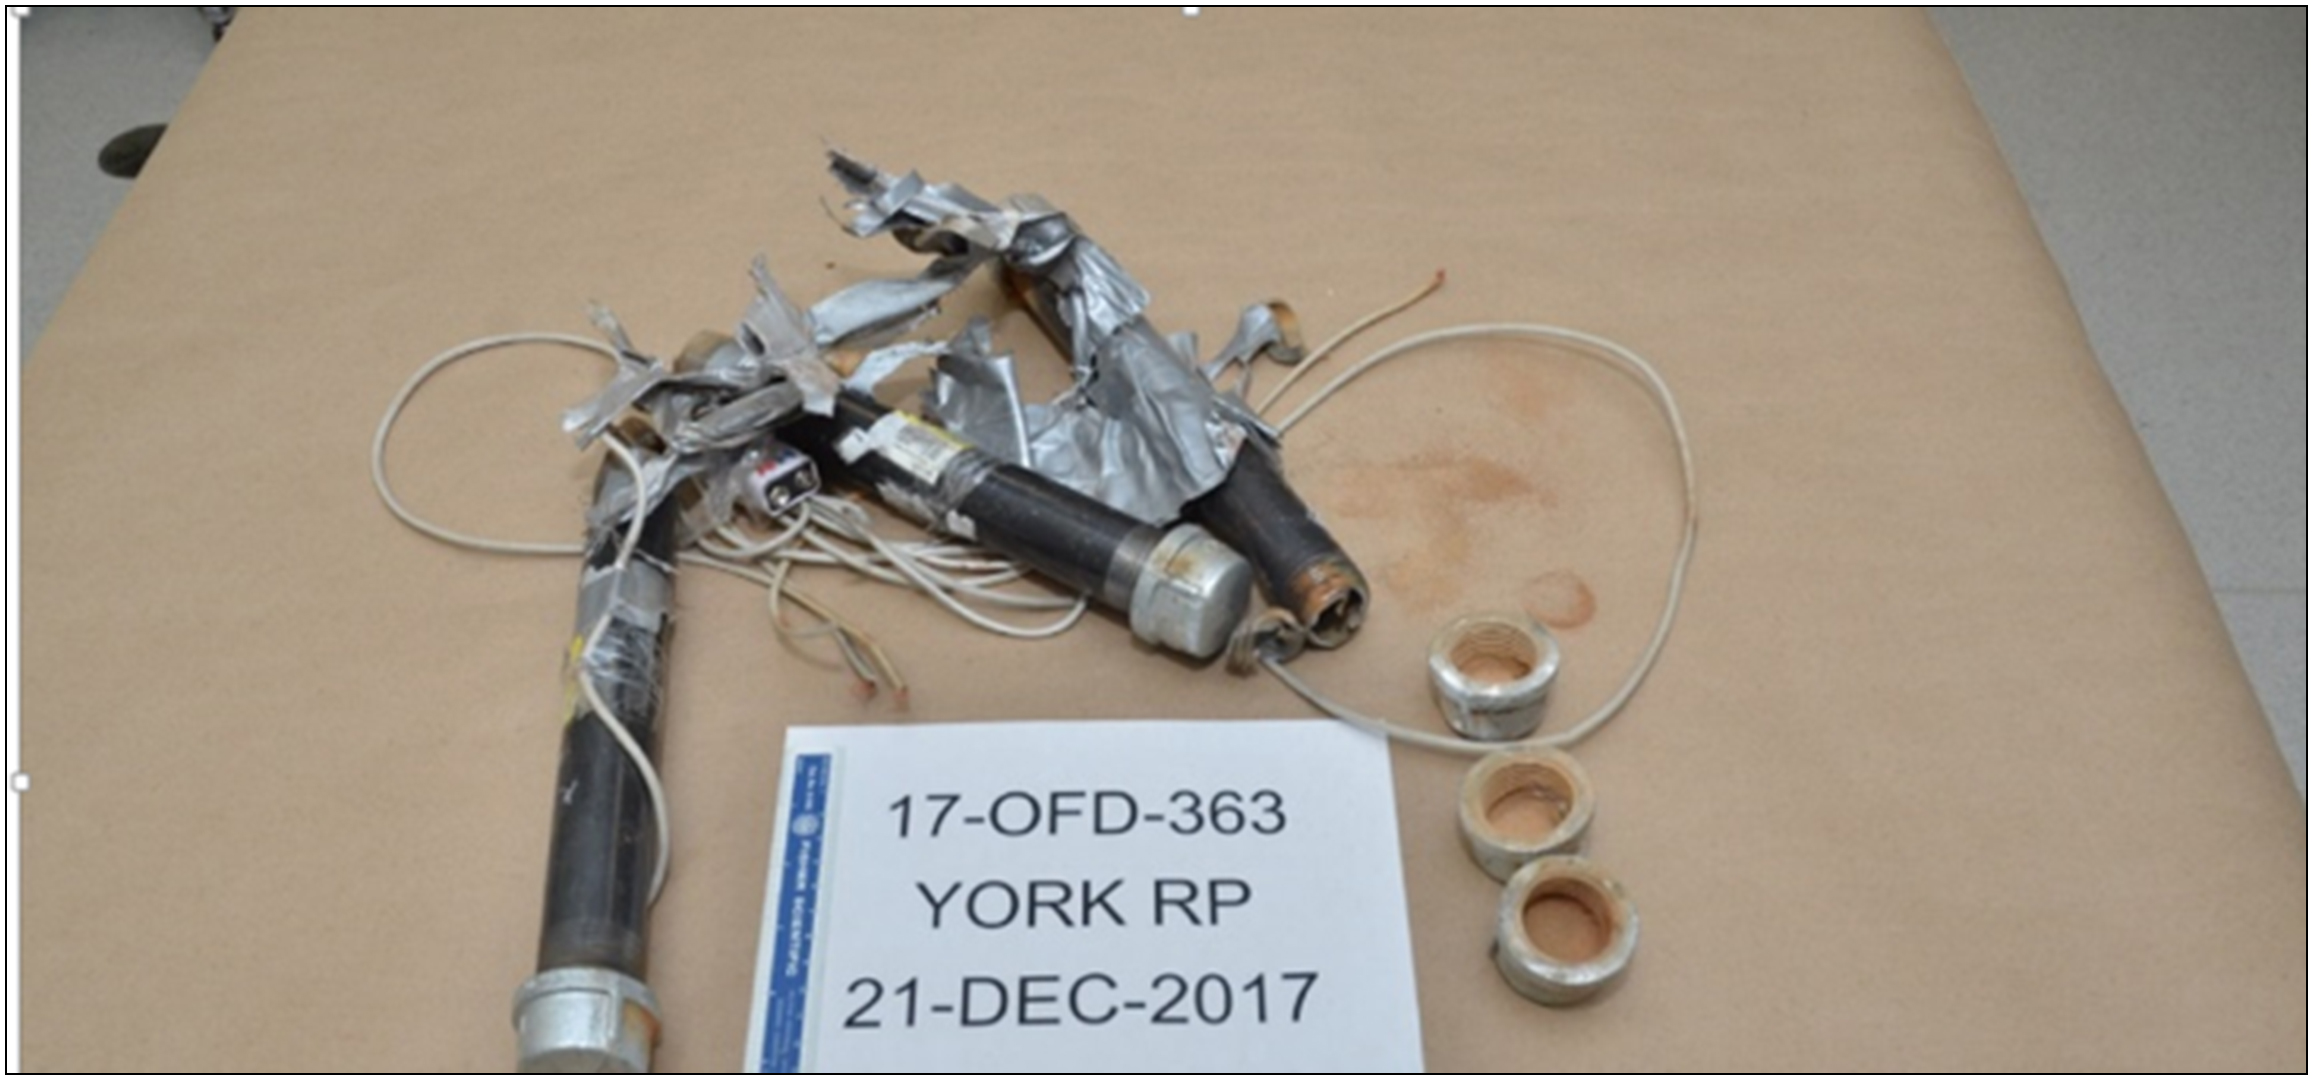 pipe bomb components including electrical wires